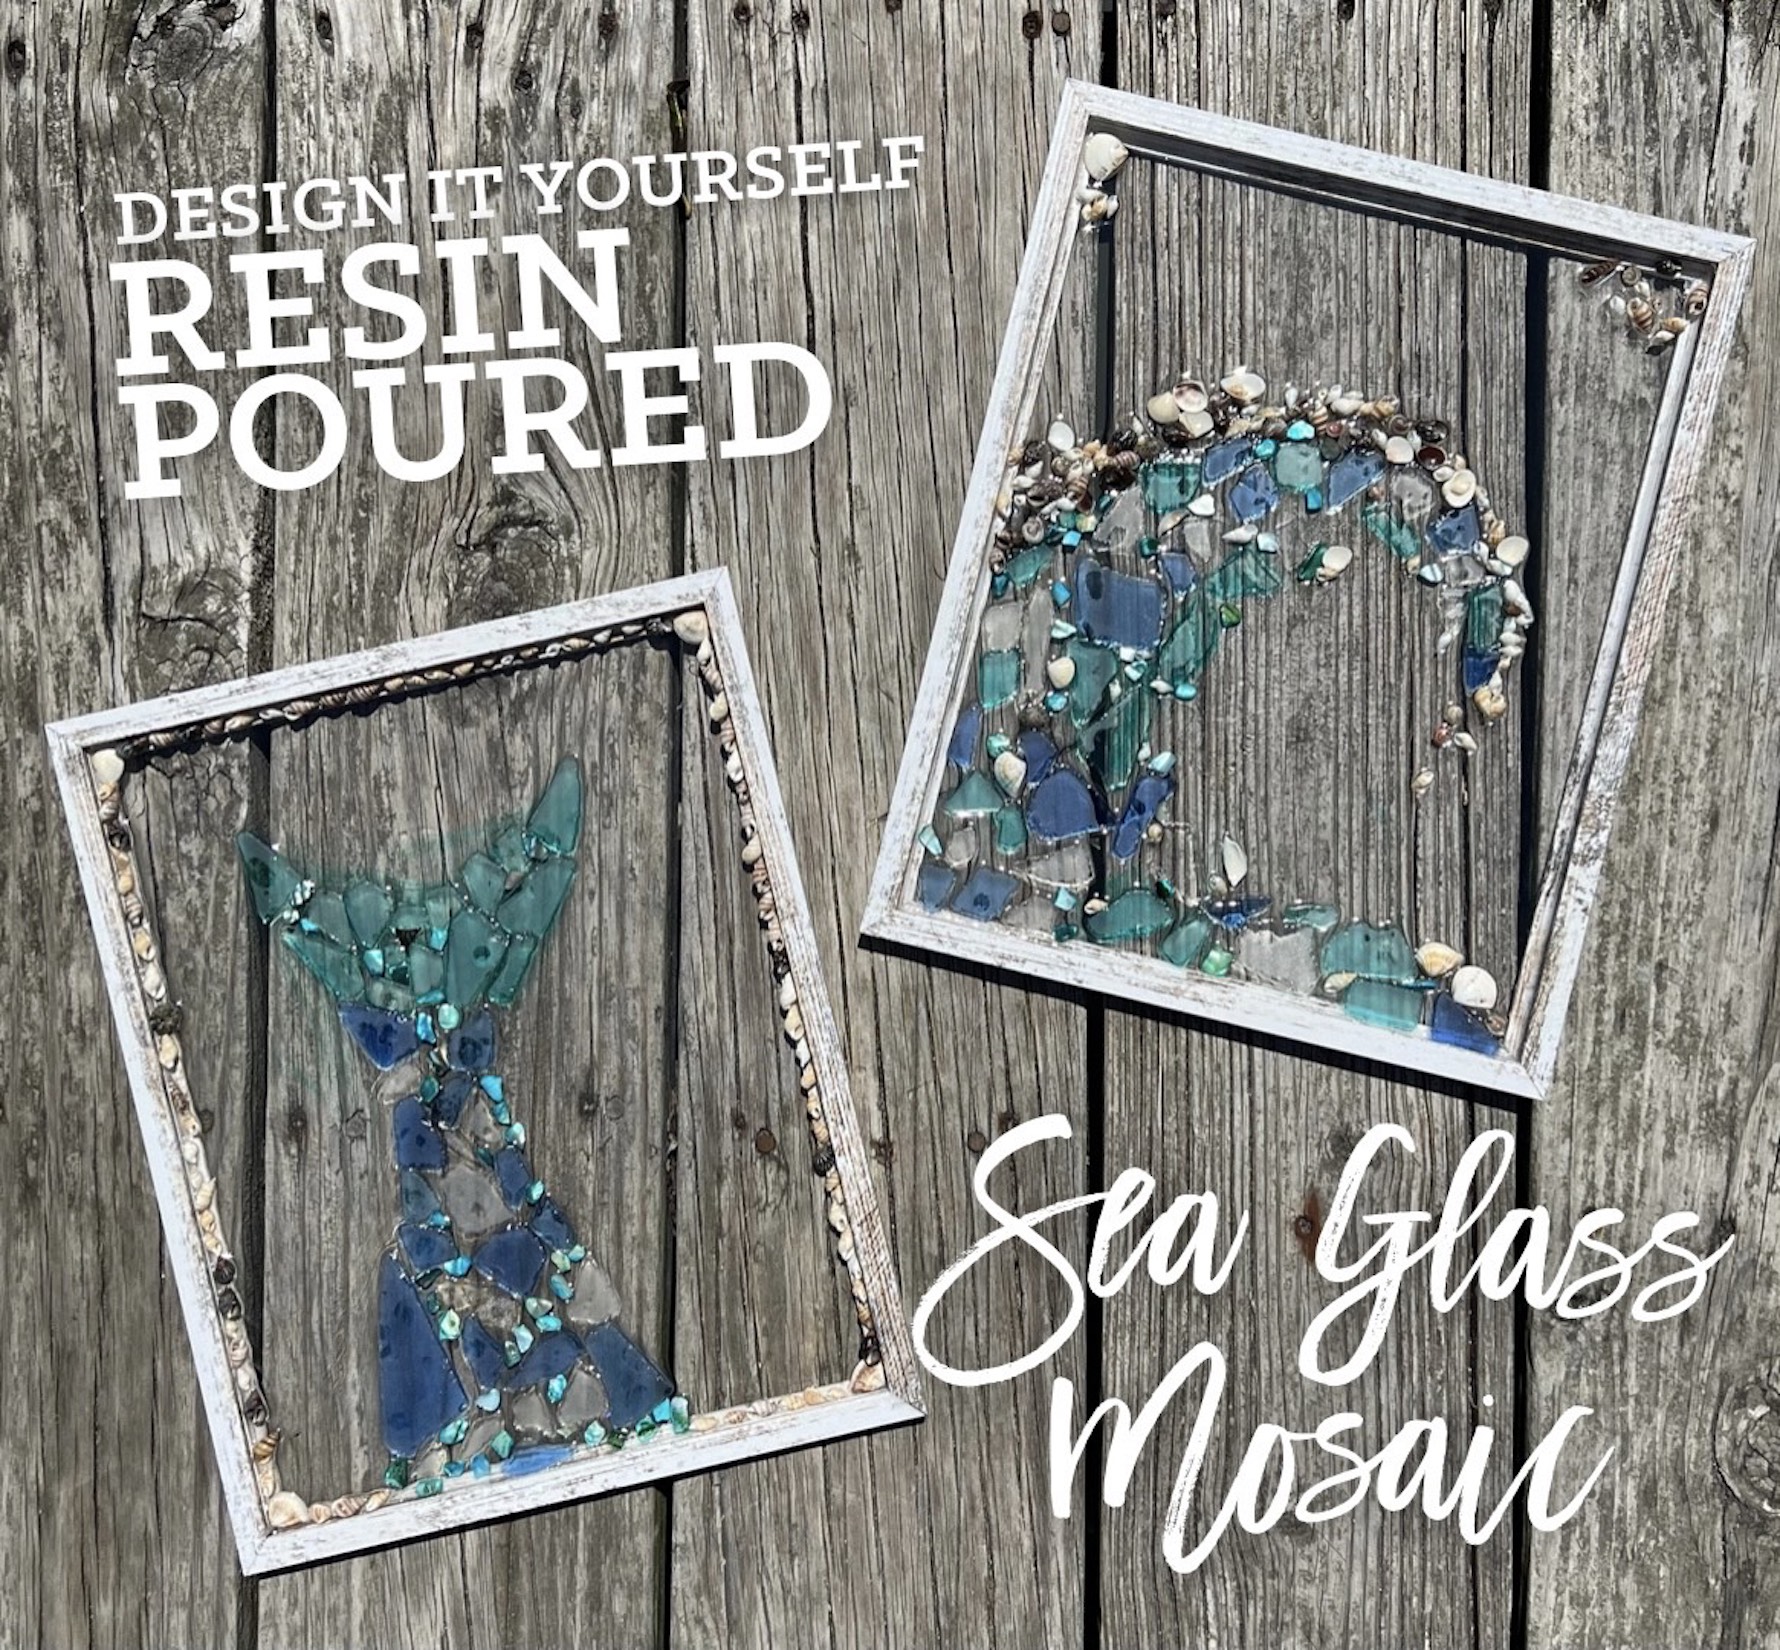 NEW! Resin Poured Sea Glass Mosaic Workshop! 1:00-3:00pm